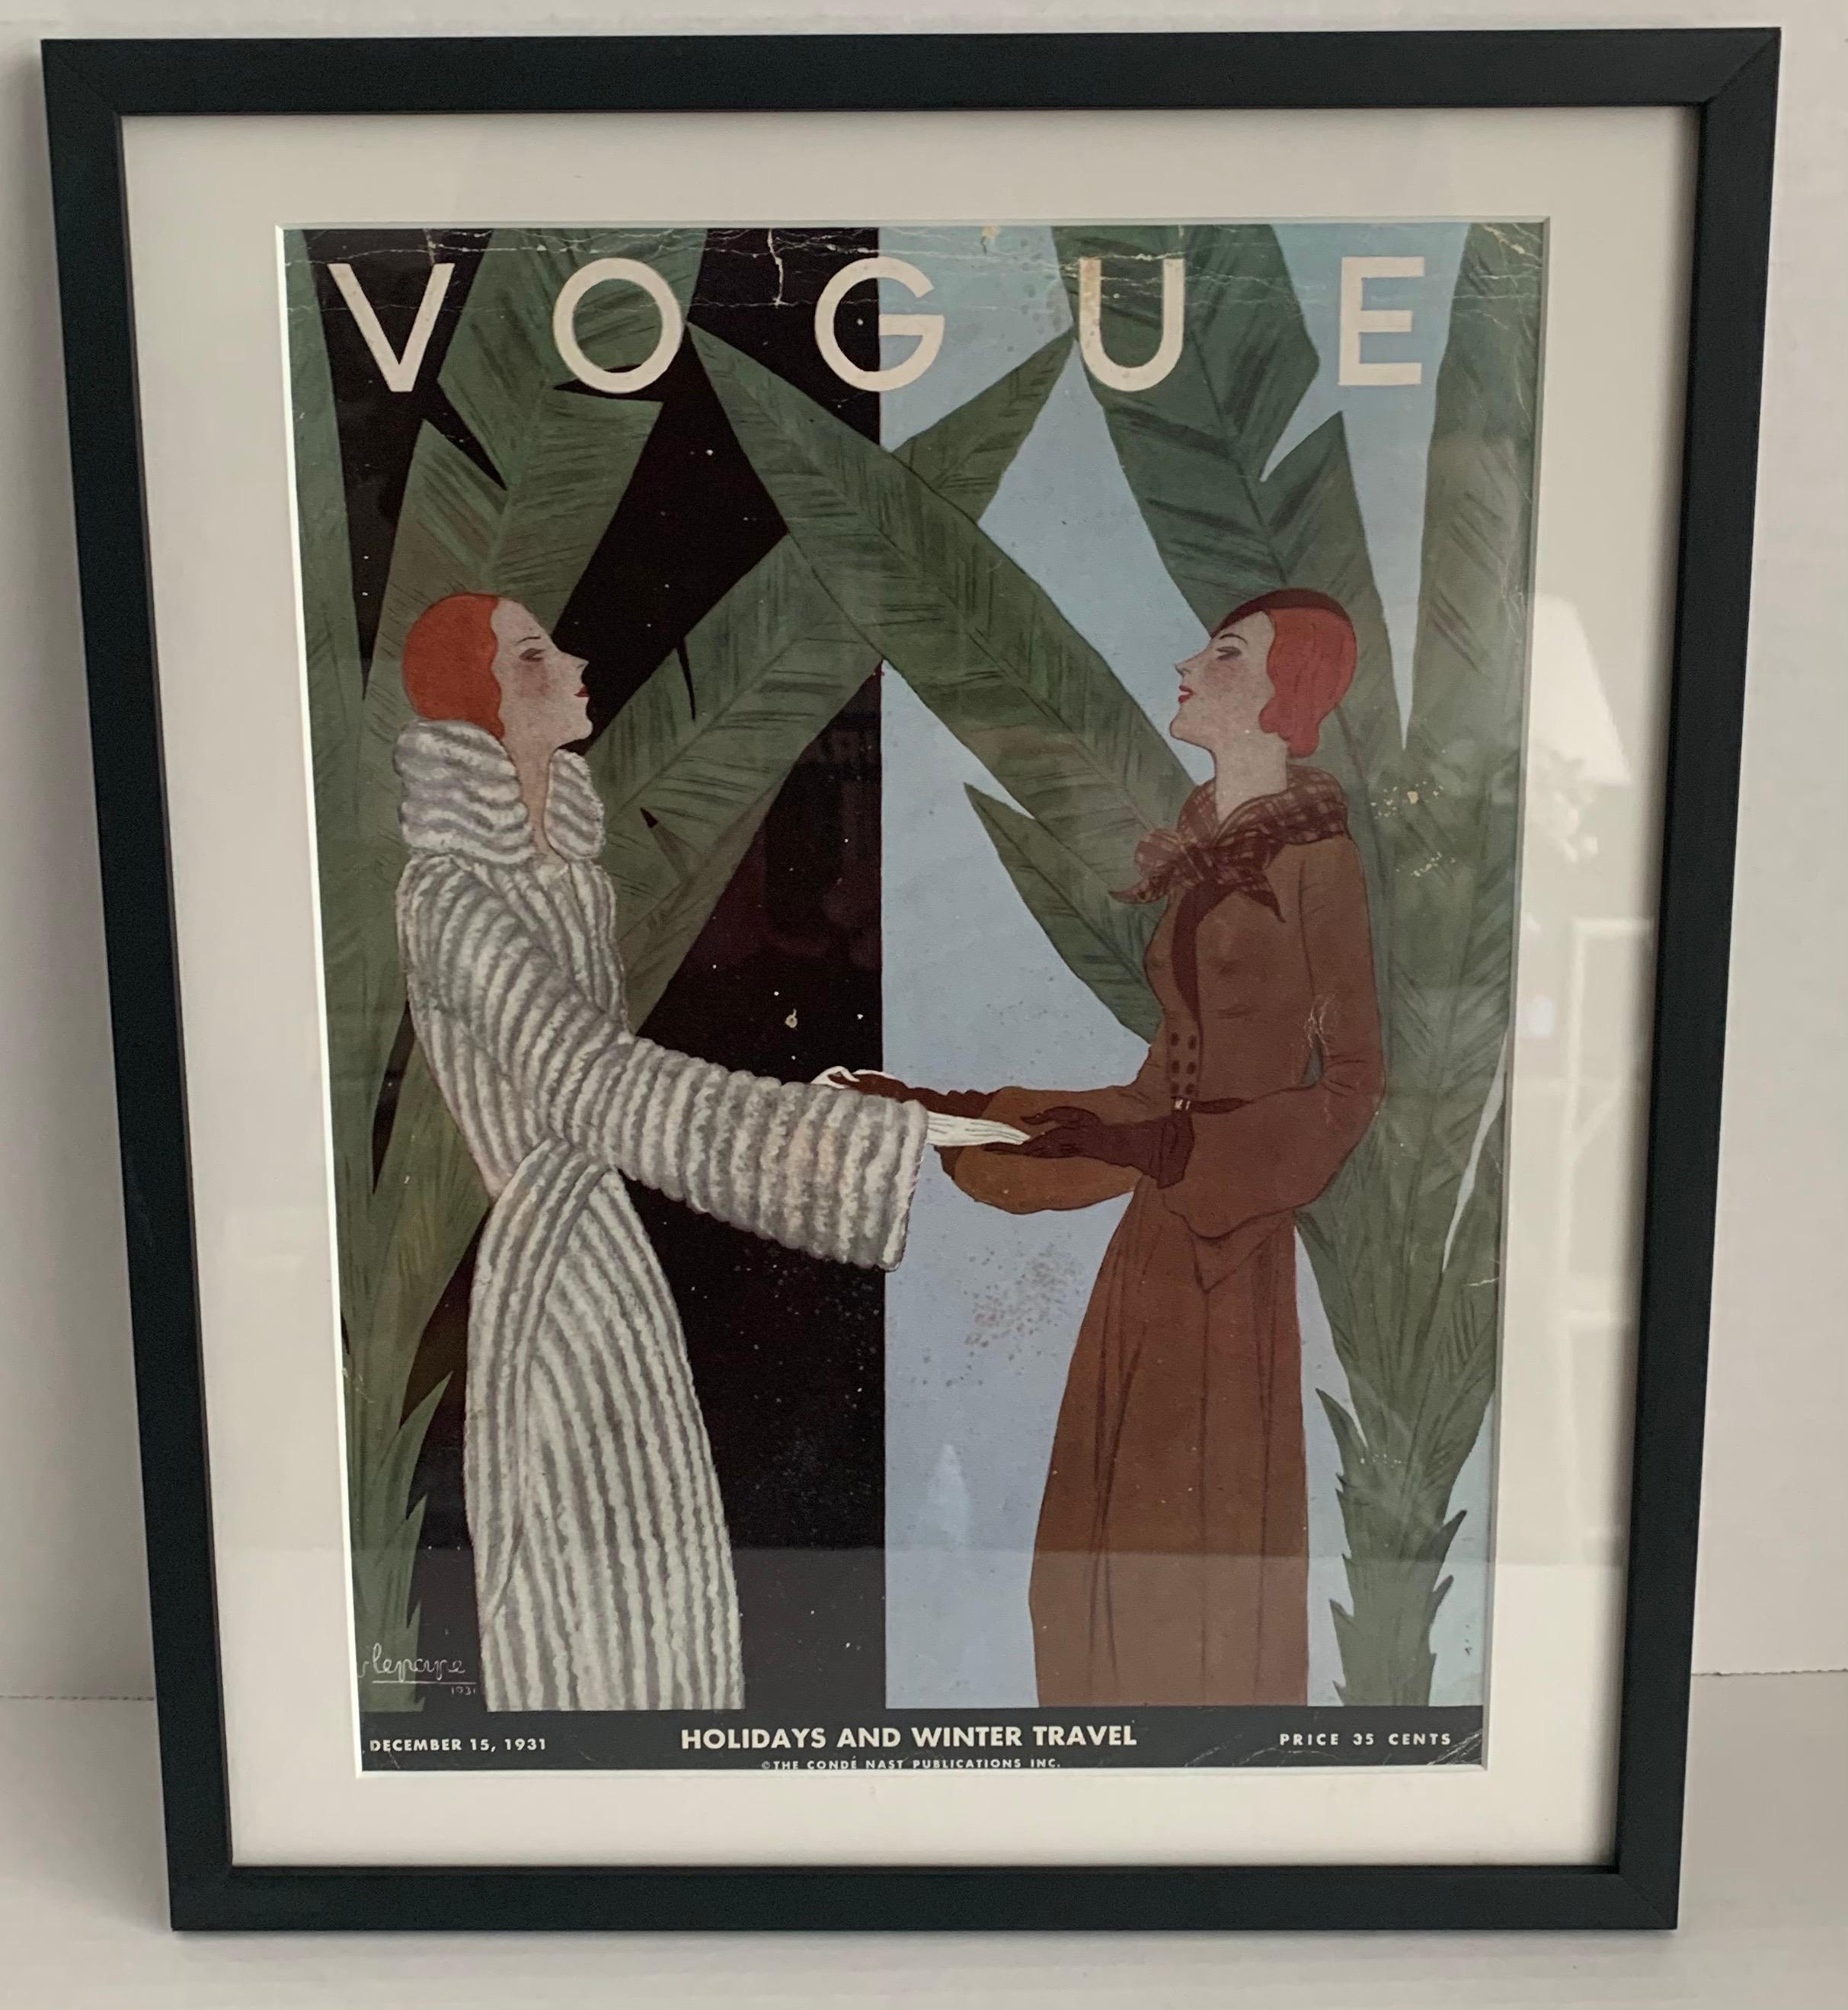 Vogue magazine December 15th 1931 cover. Original 1931 magazine cover with illustration by Georges Lepape (1887-1971).
Newly custom matted and framed in black wood frame.